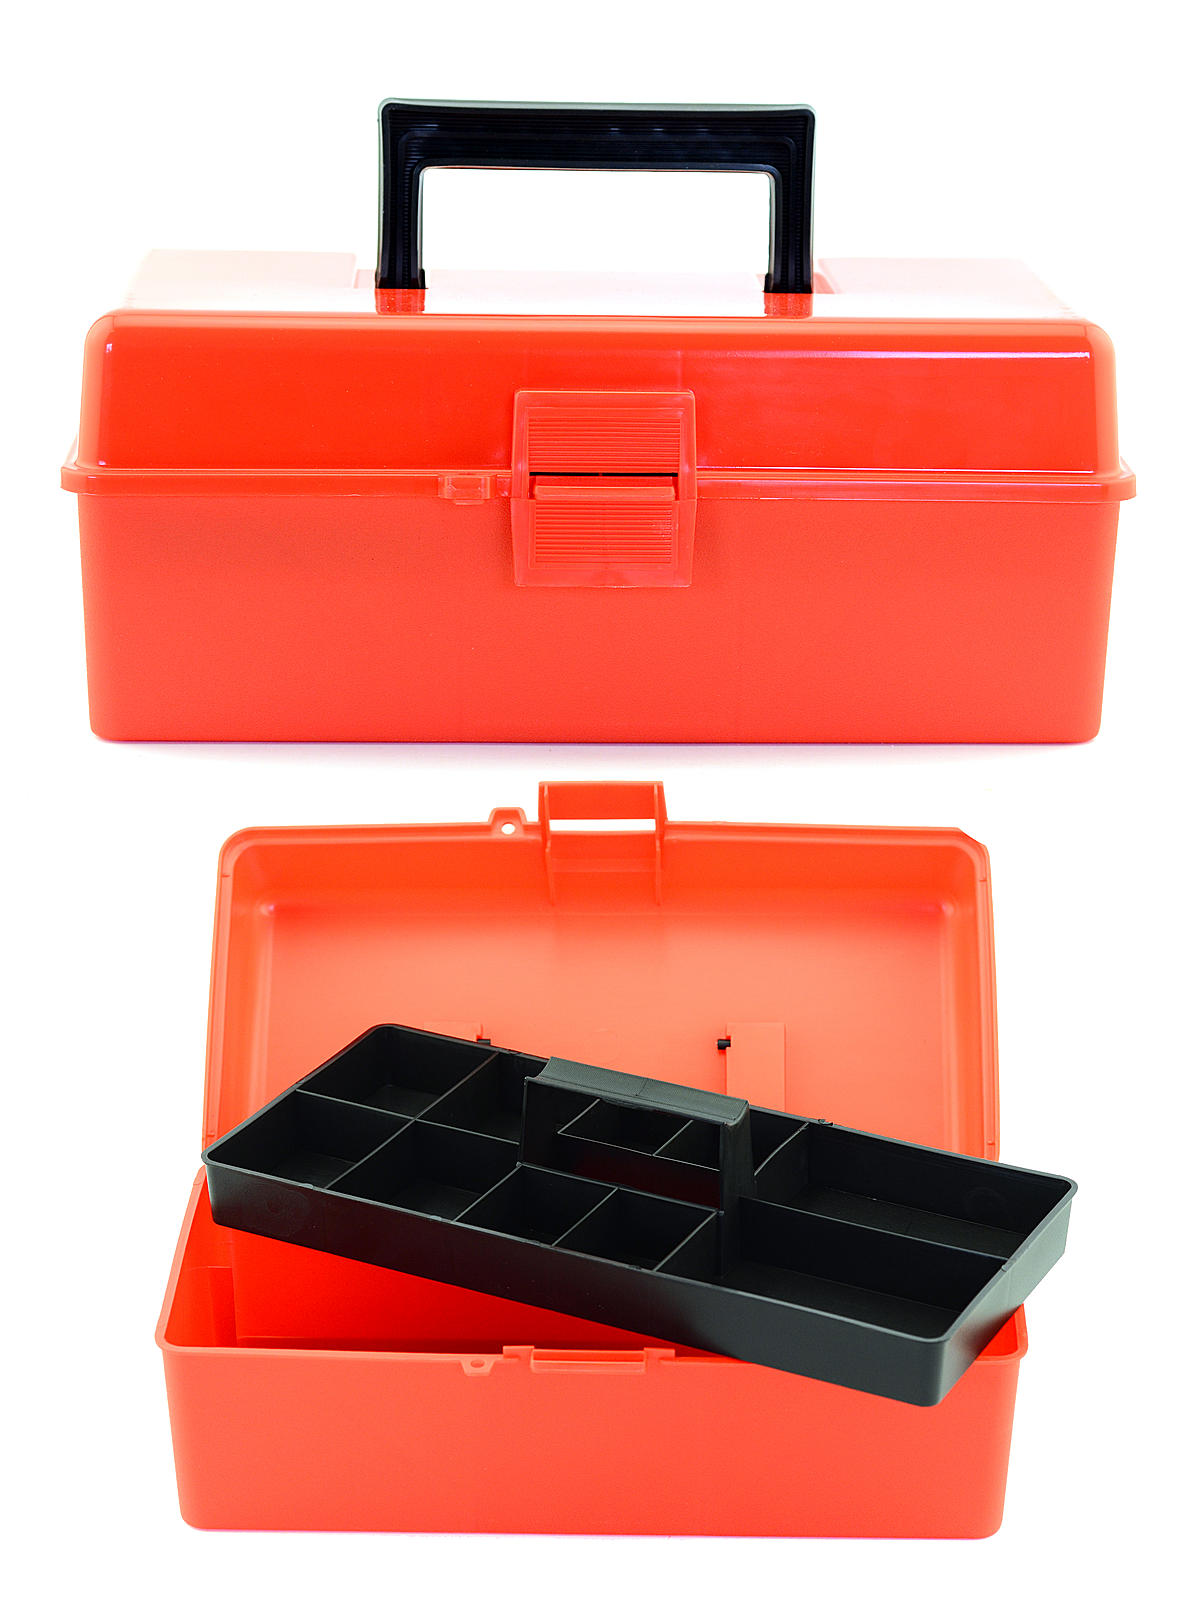 12 Inch Utility Box With Lift-out Tray Utility Box